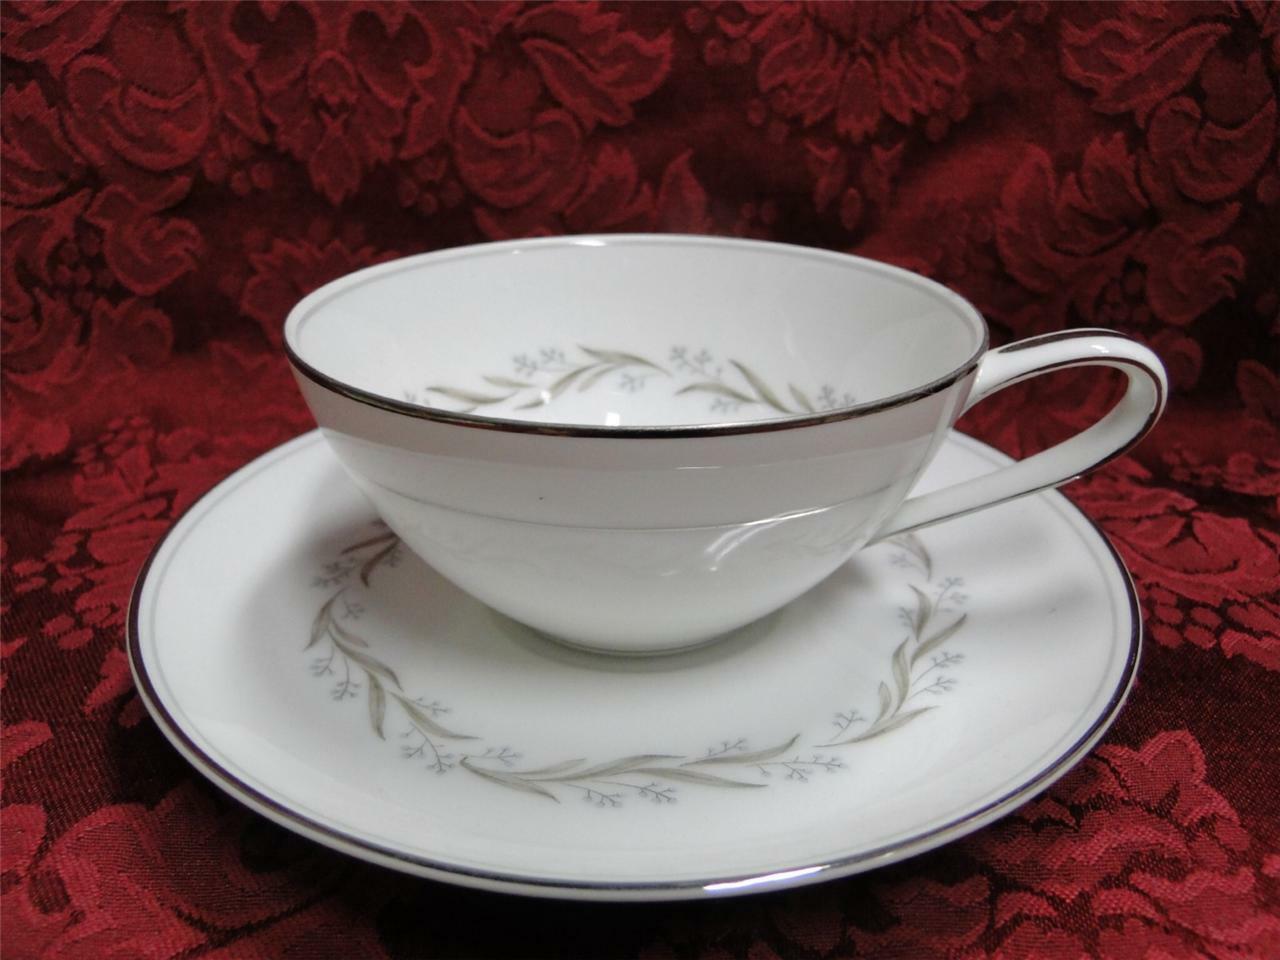 Noritake Almont, 6125, Blue Berries, Gray Leaves: Cup & Saucer Set (s)